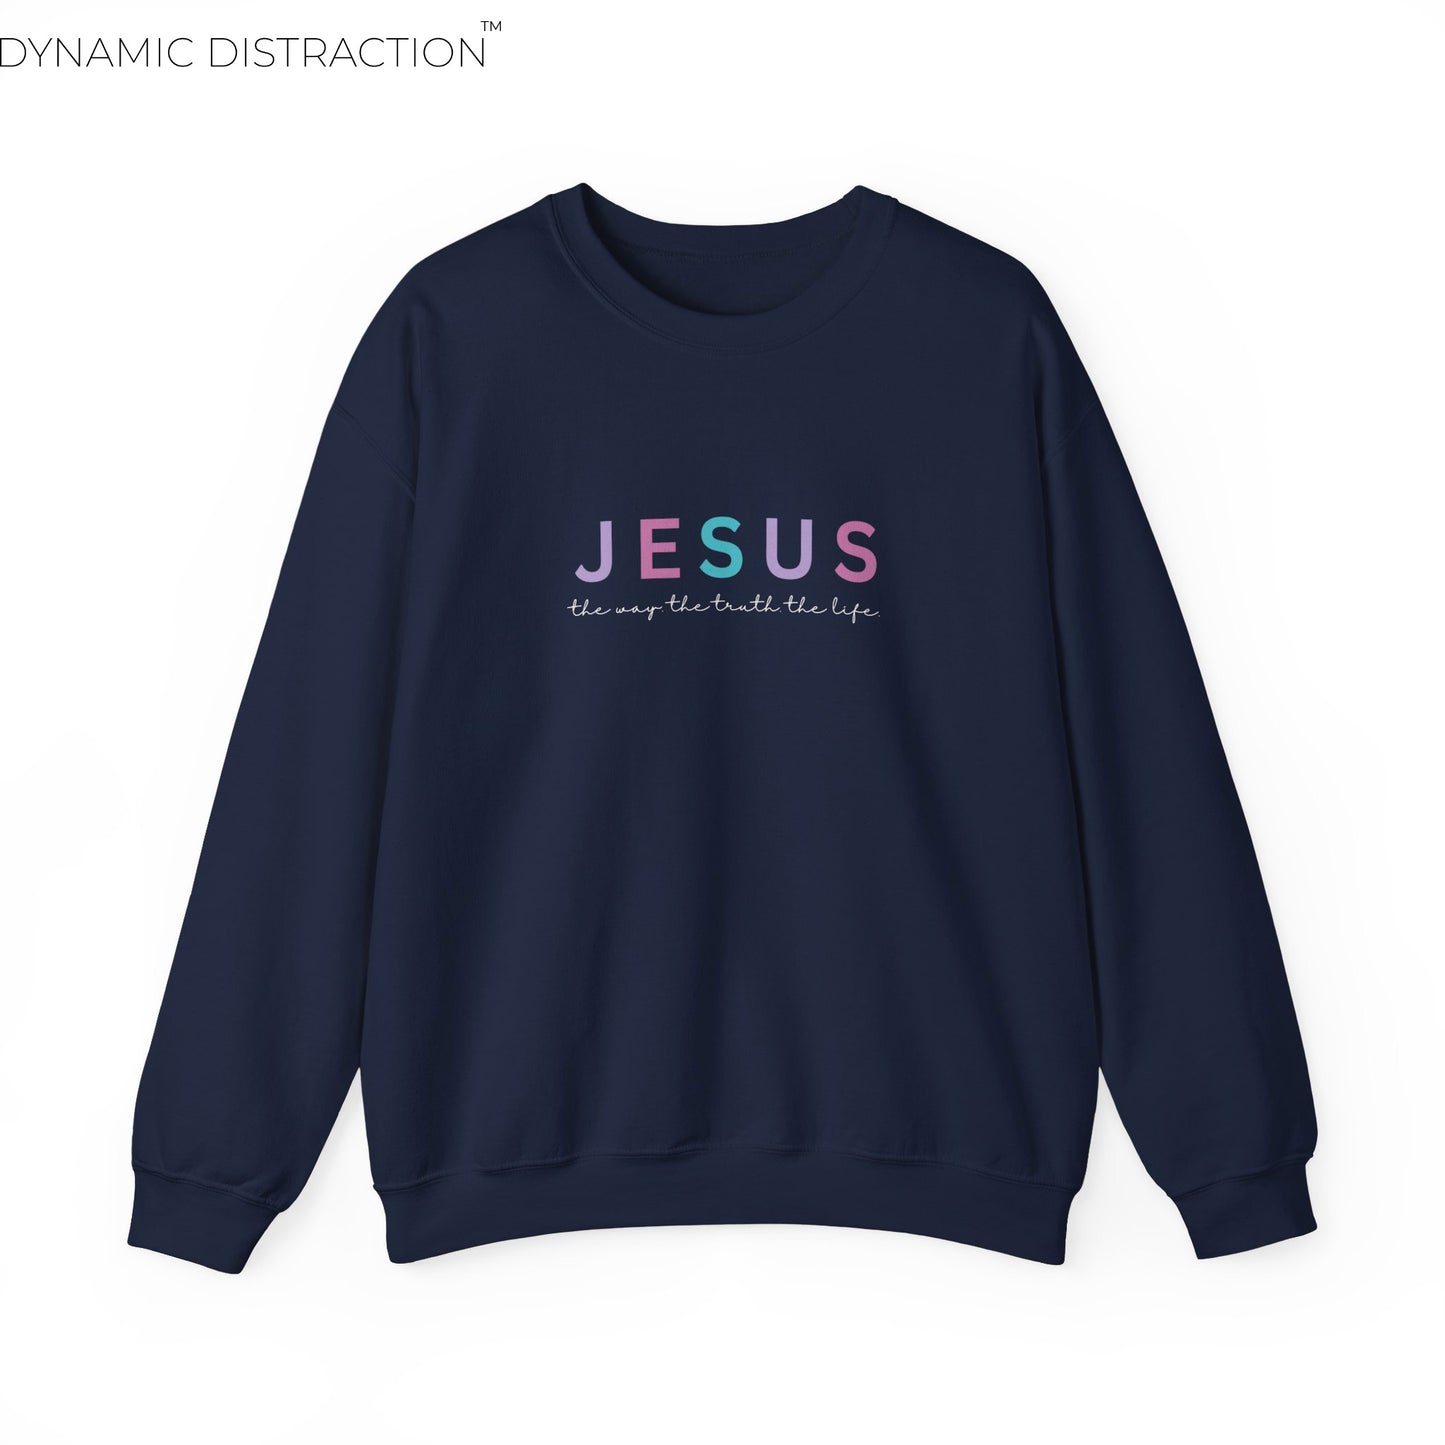 Jesus Scripture Crewneck For Women, Perfect For Religious Students, Teachers, Perfect Gift For Christian Faith, Catholic School Gift & Faithful Individuals